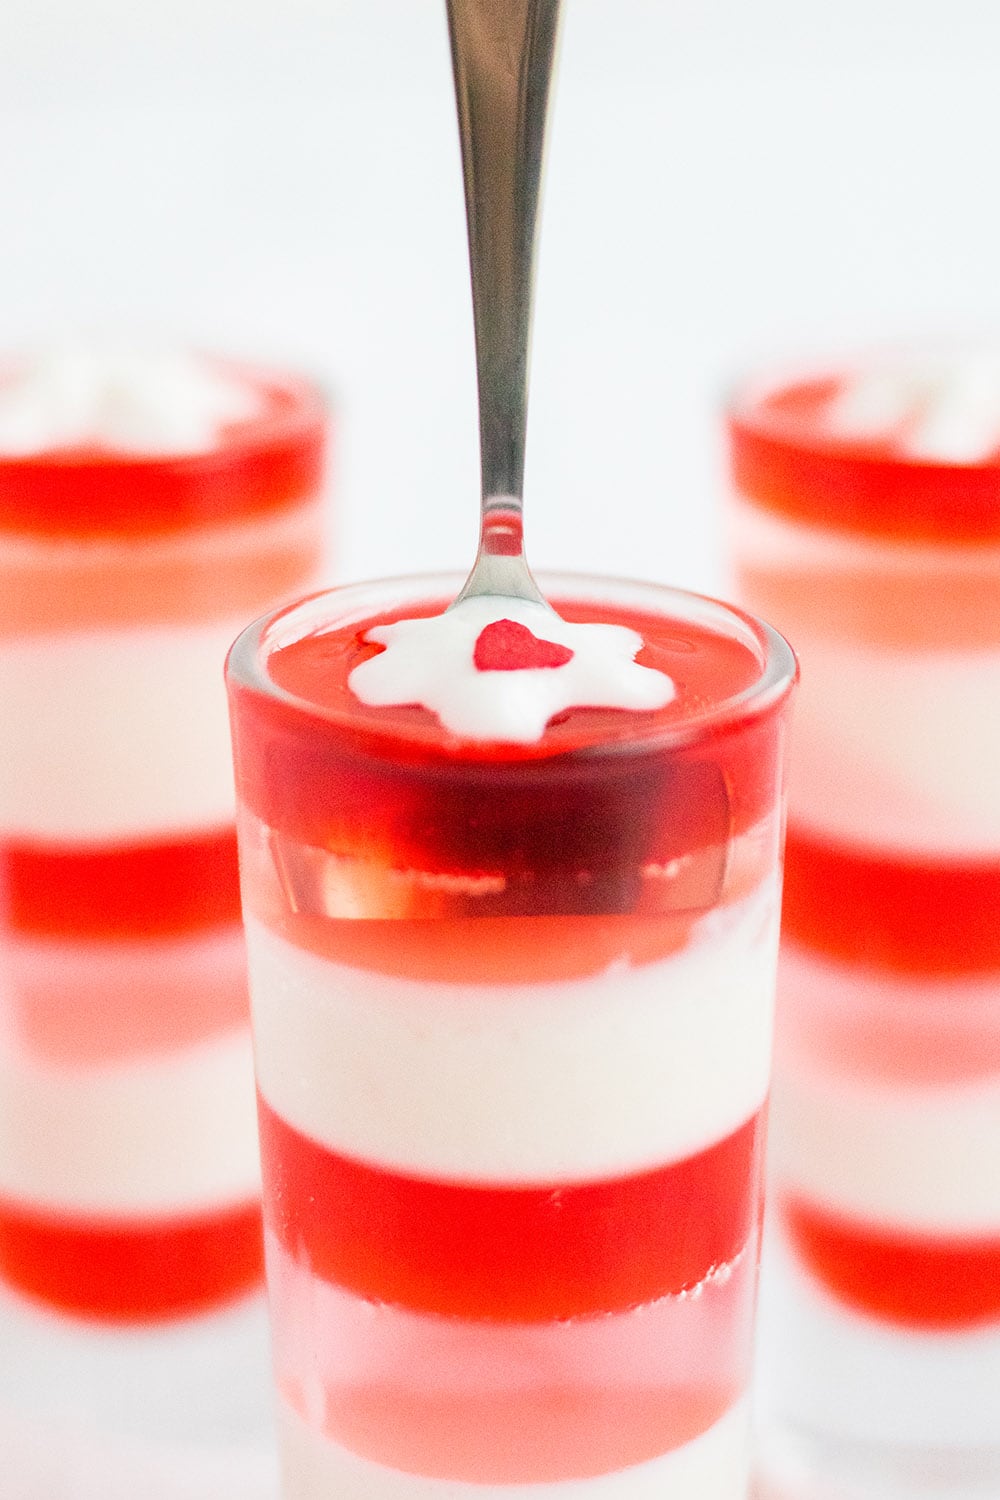 Spoon in a glass of layered jello with pink, red, and white layers.